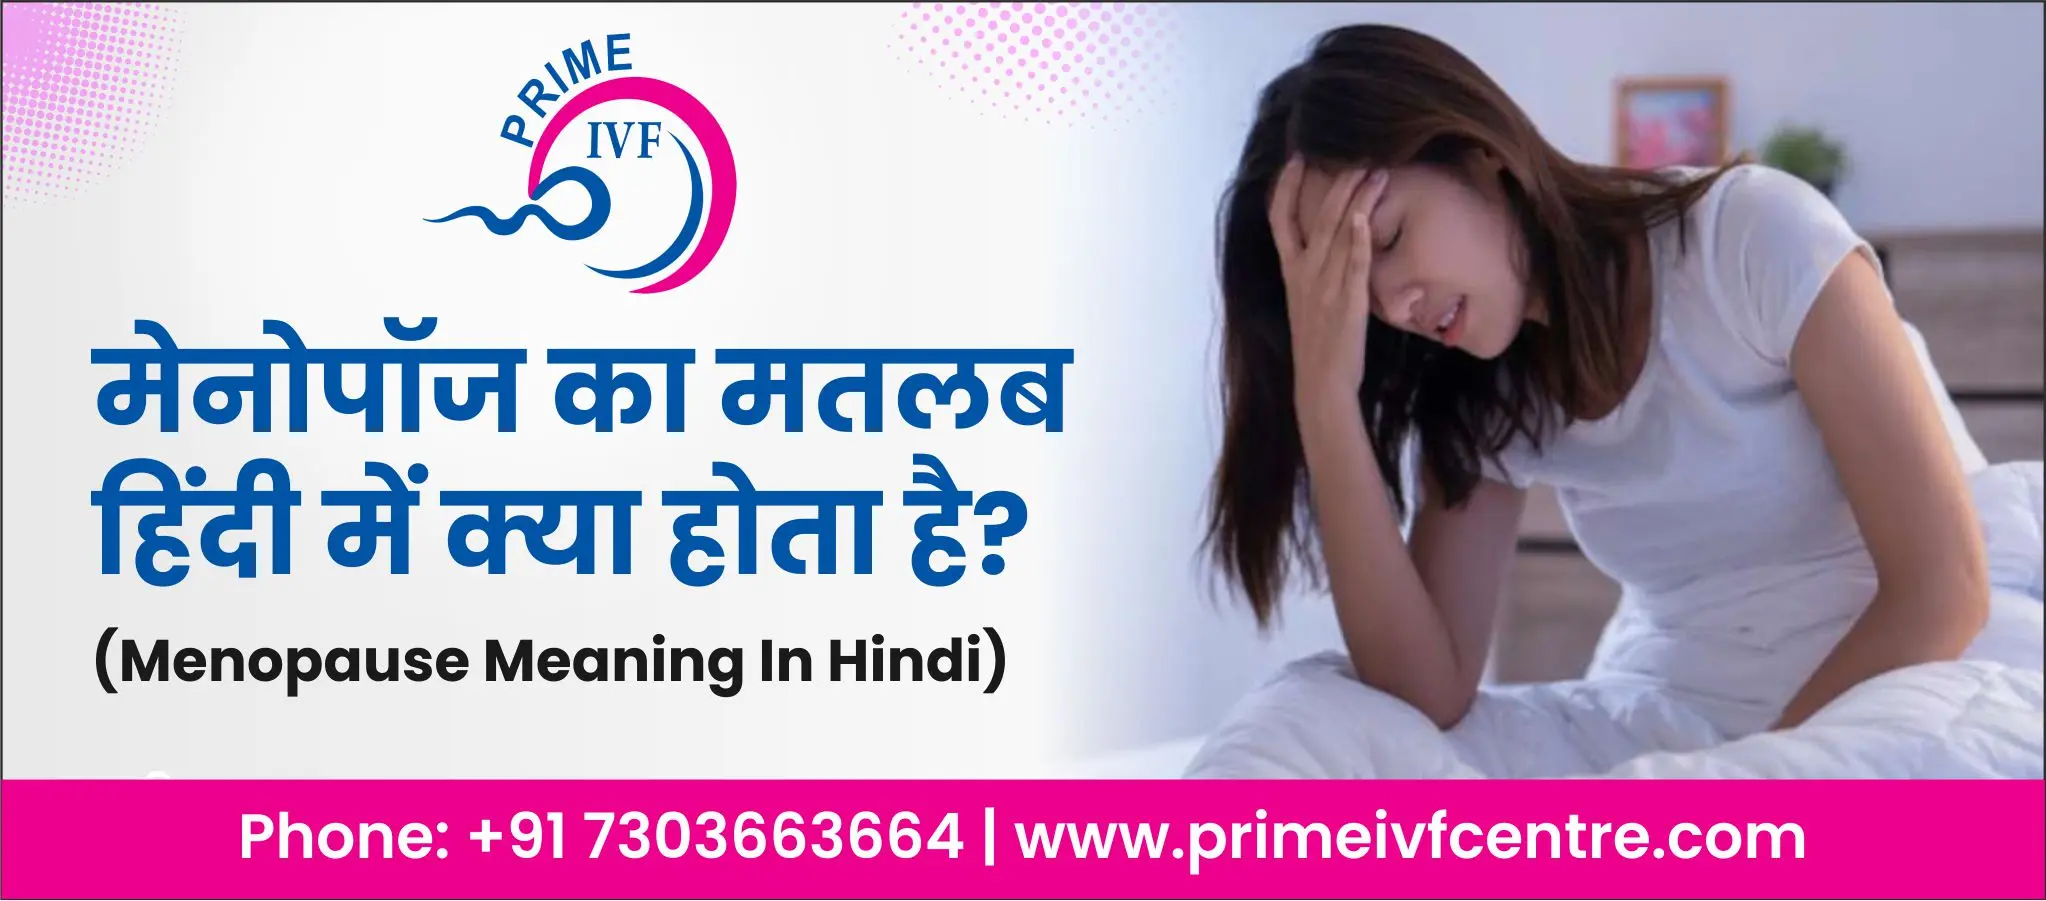 menopause meaning in hindi